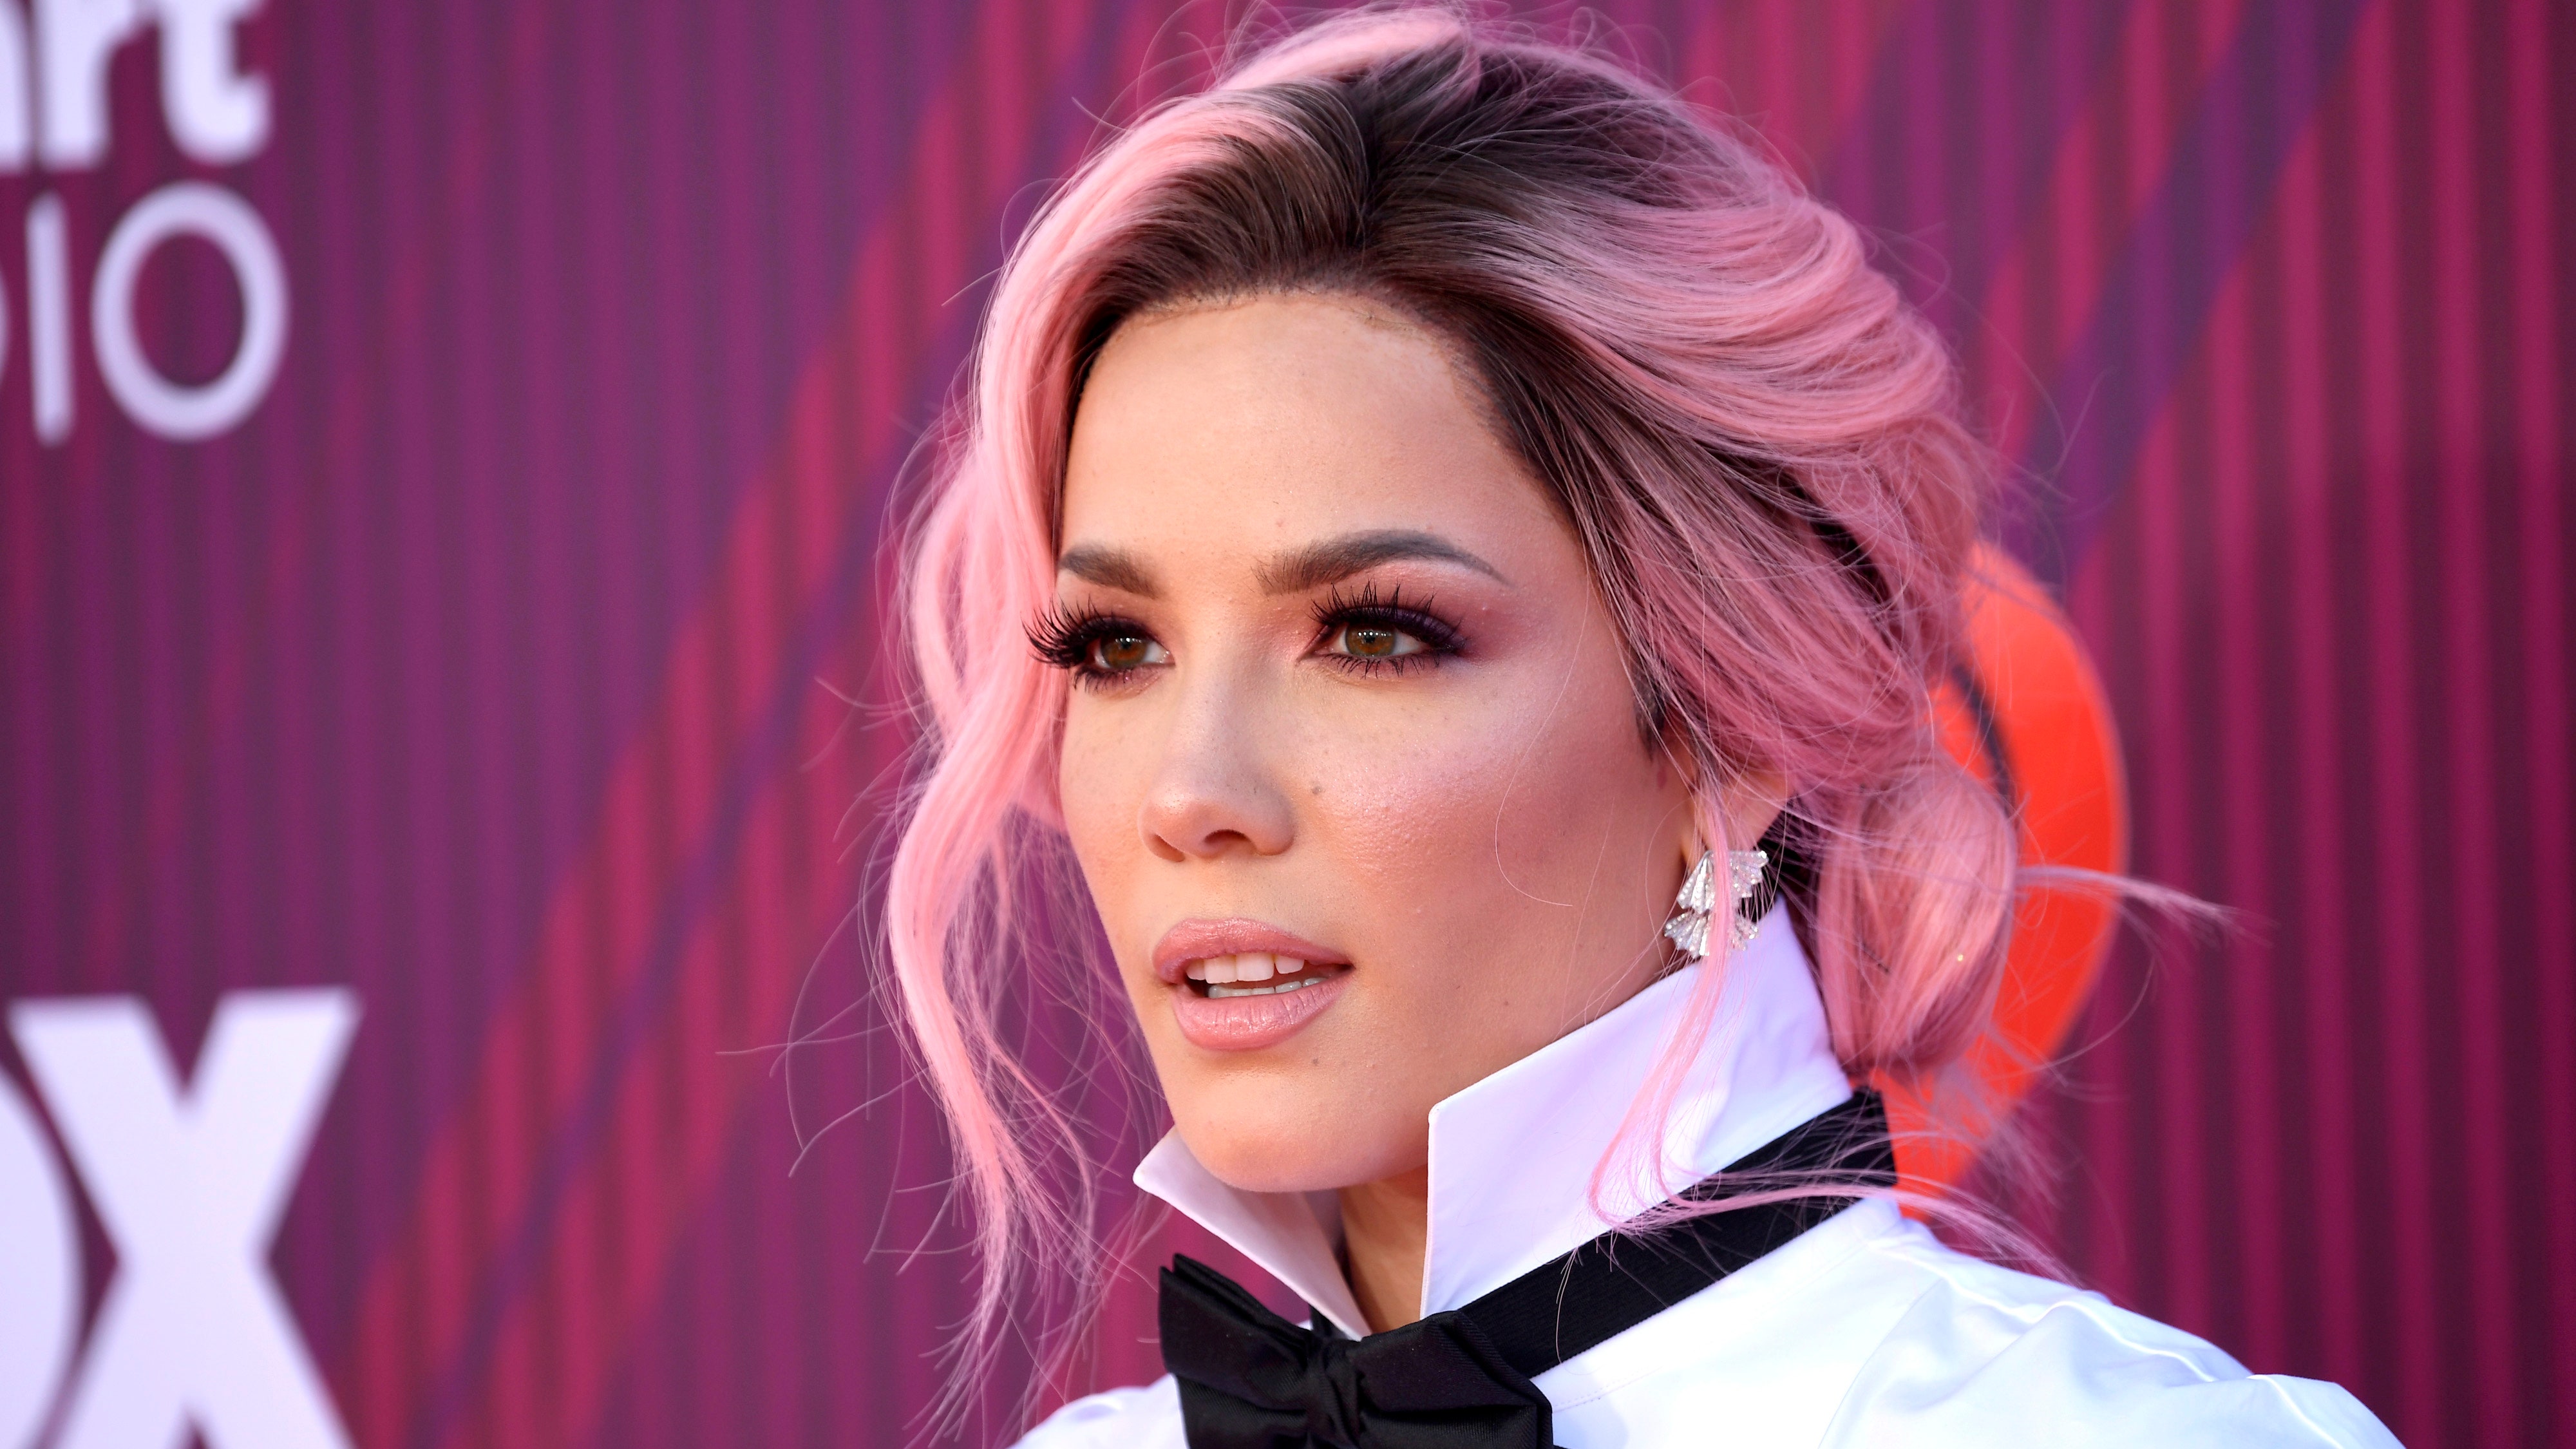 Halsey Buys Midcentury Modern Home For $2.4 Million